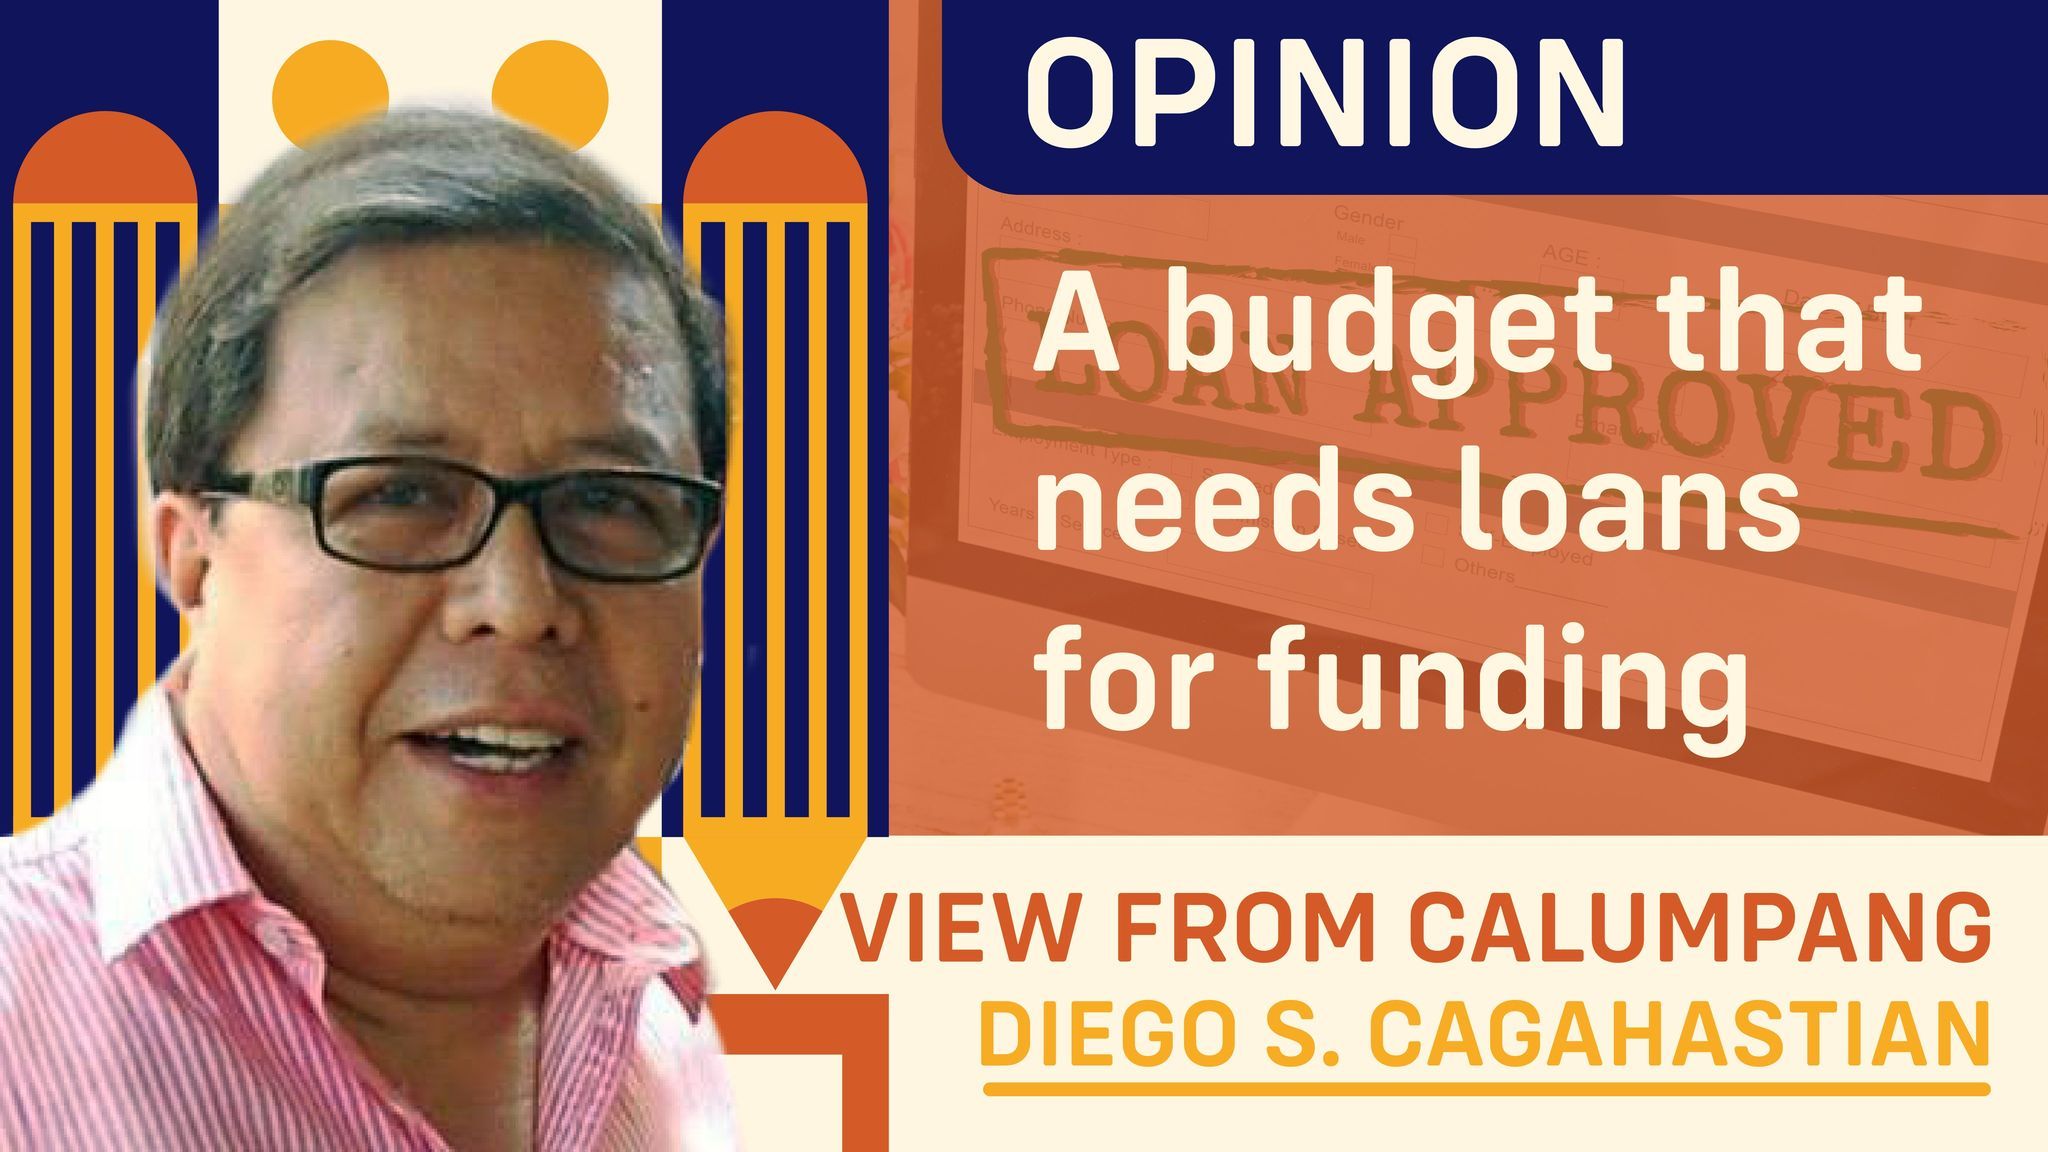 a budget that needs loans for funding